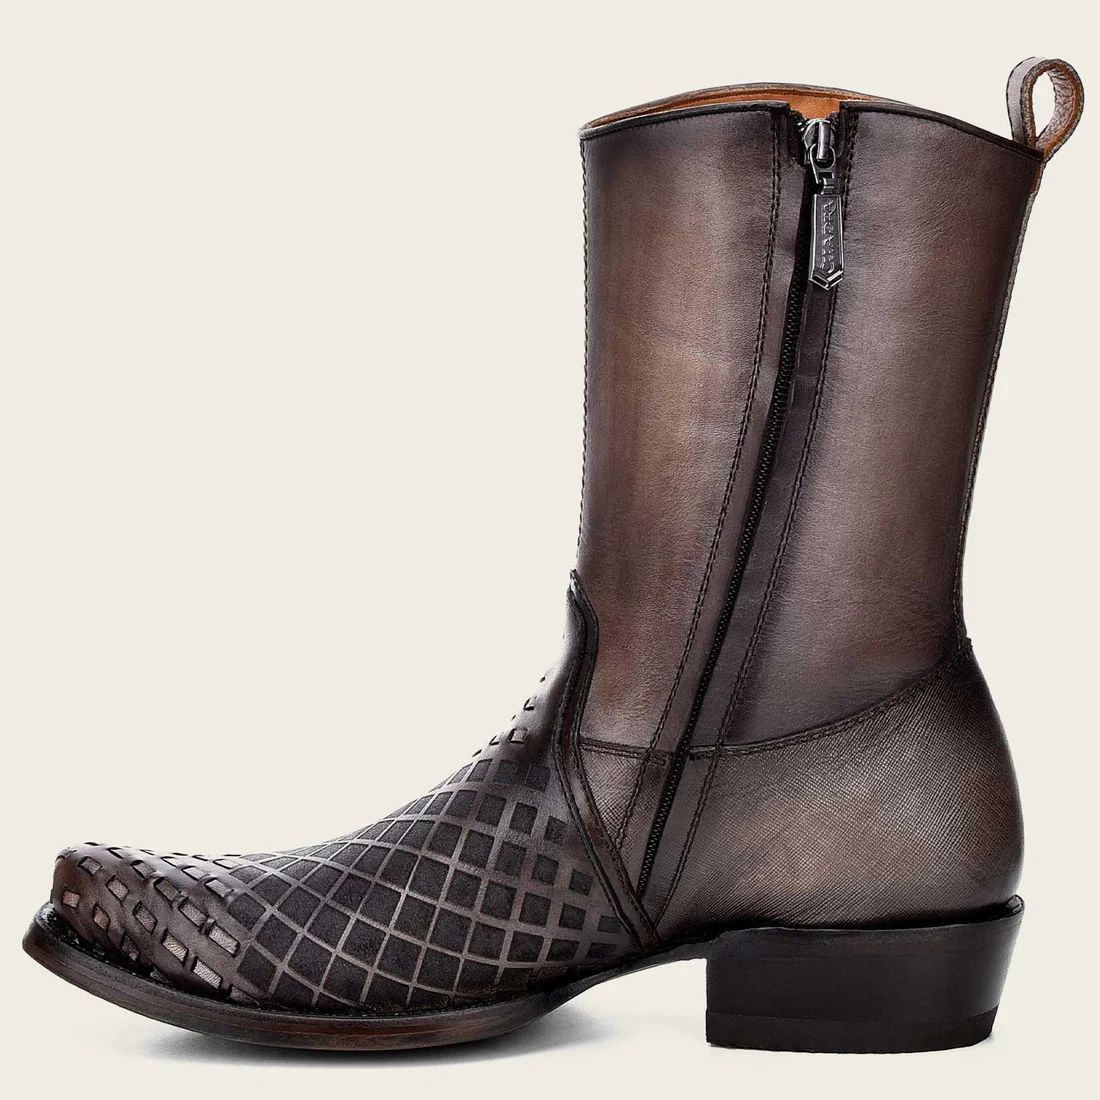 Cuadra | Engraved Oxford Leather Boot